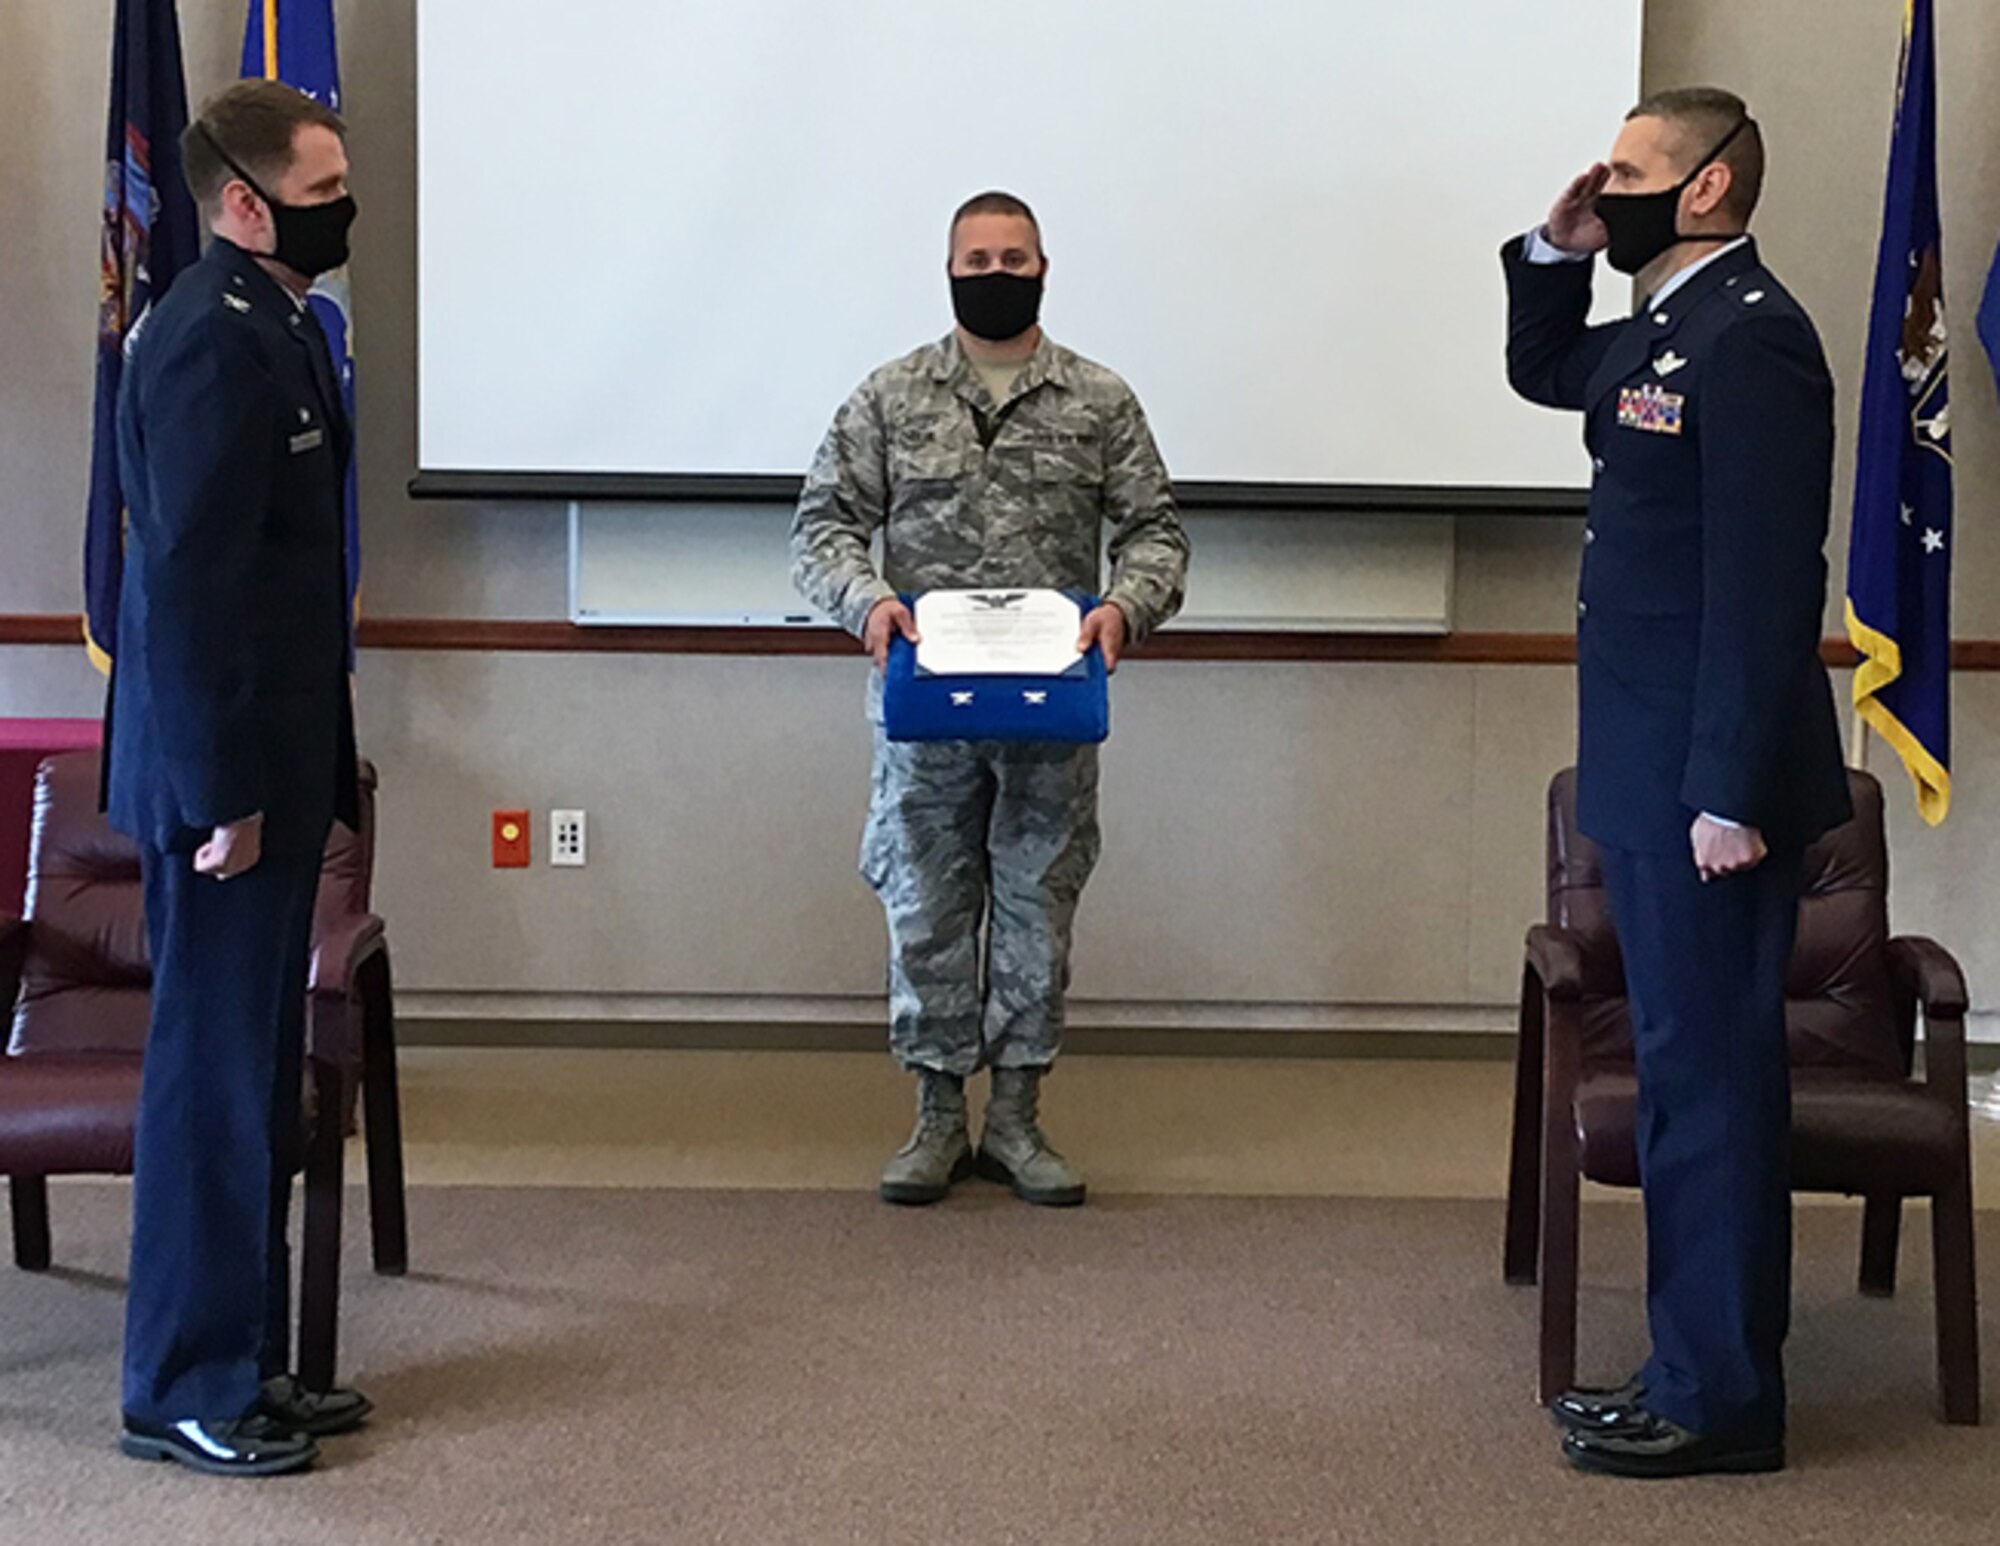 Rathmell Promoted to Colonel